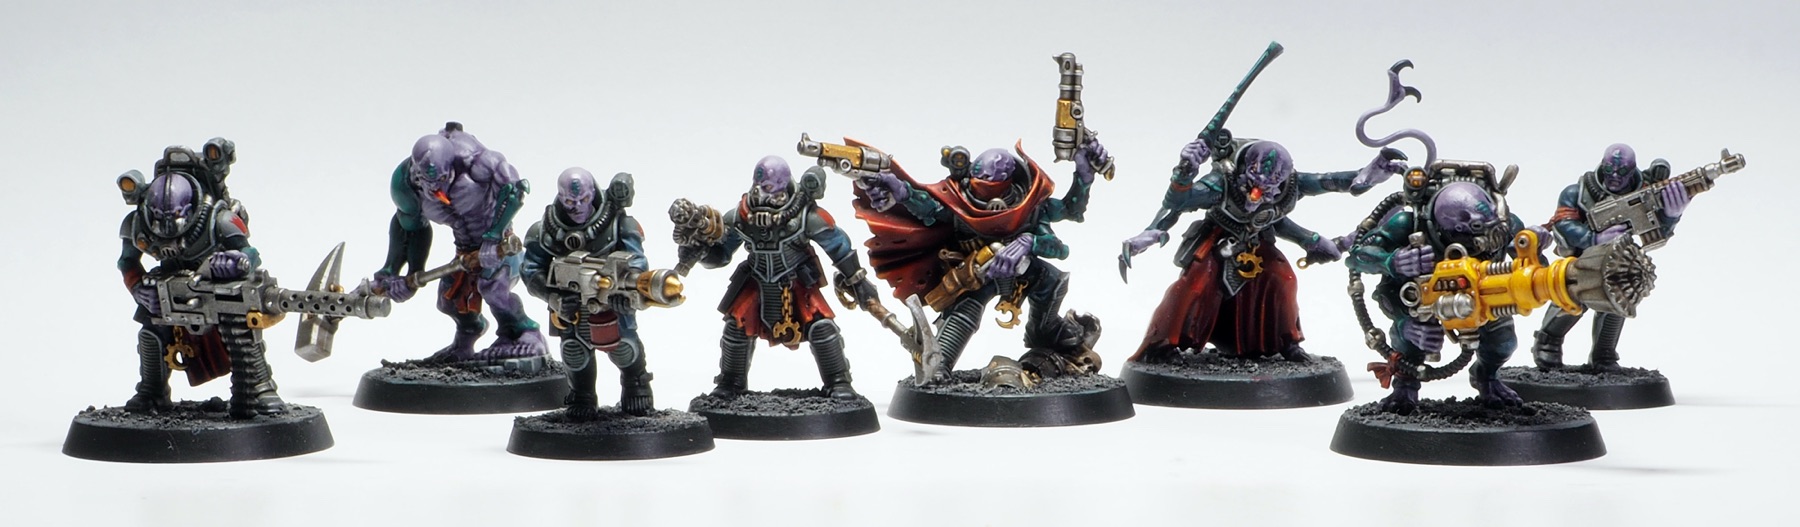 A photograph of various Genestealer Cults models painted by me